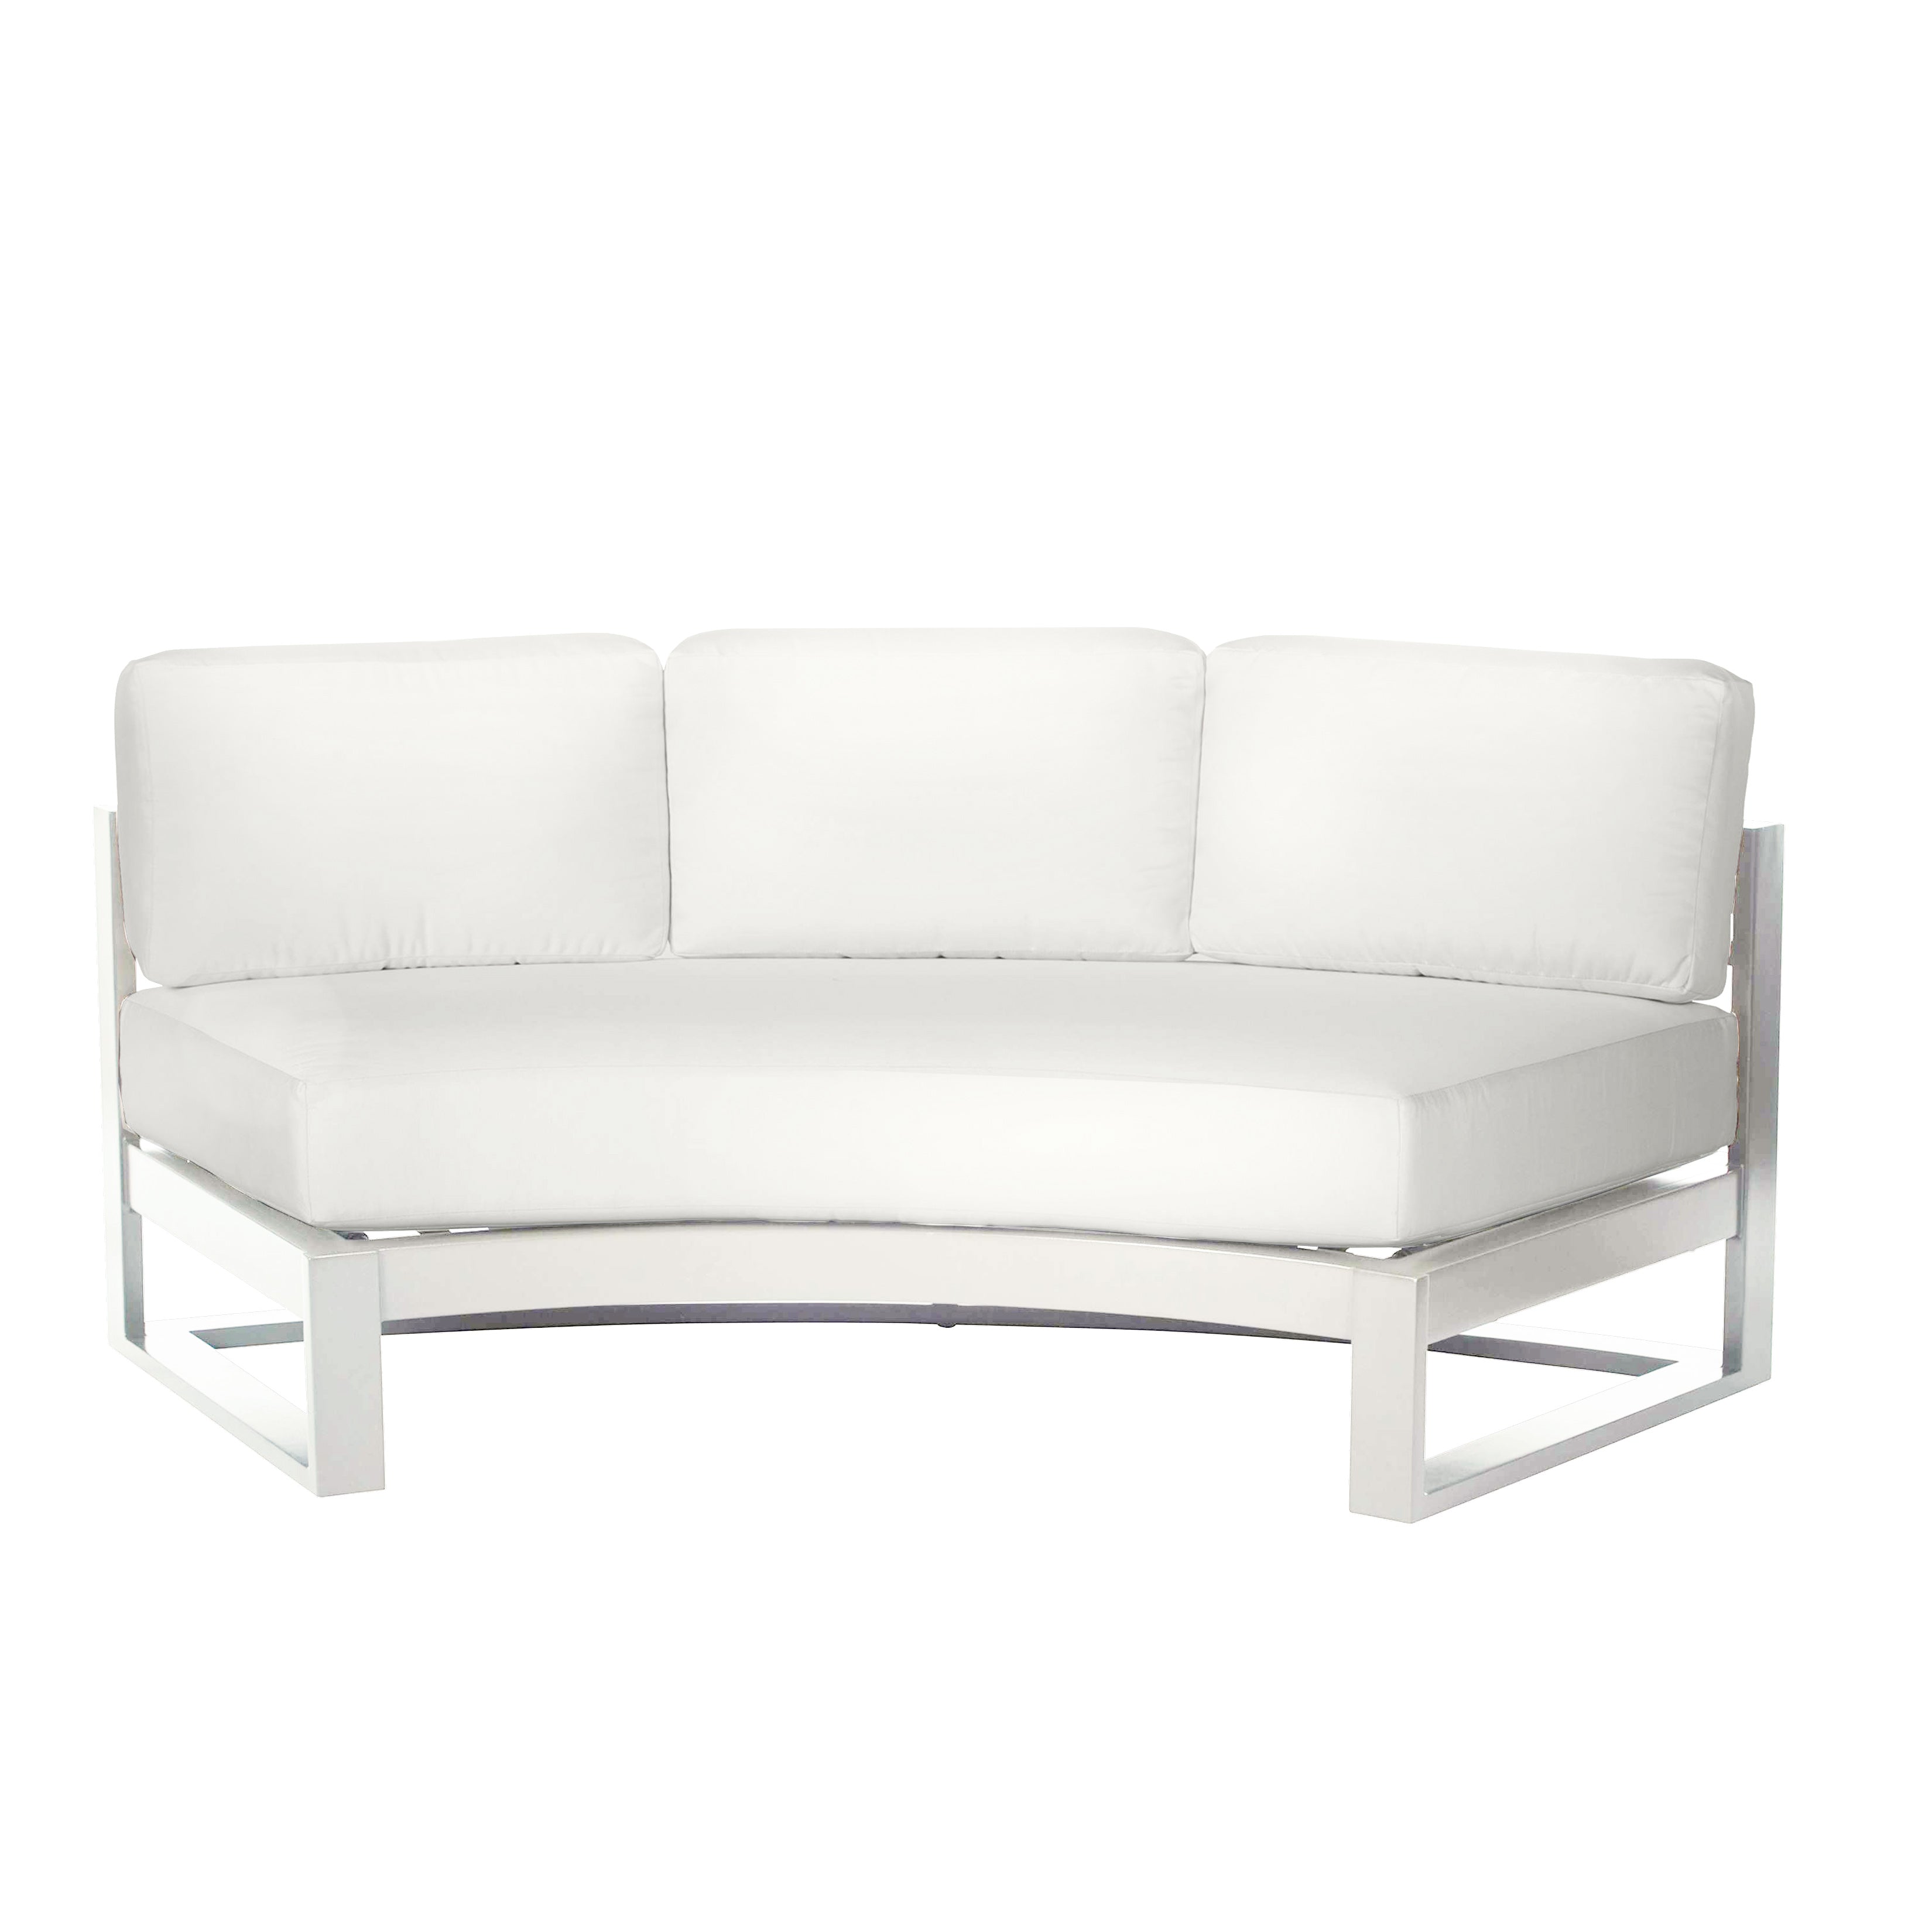 Palermo Curved Sofa Section